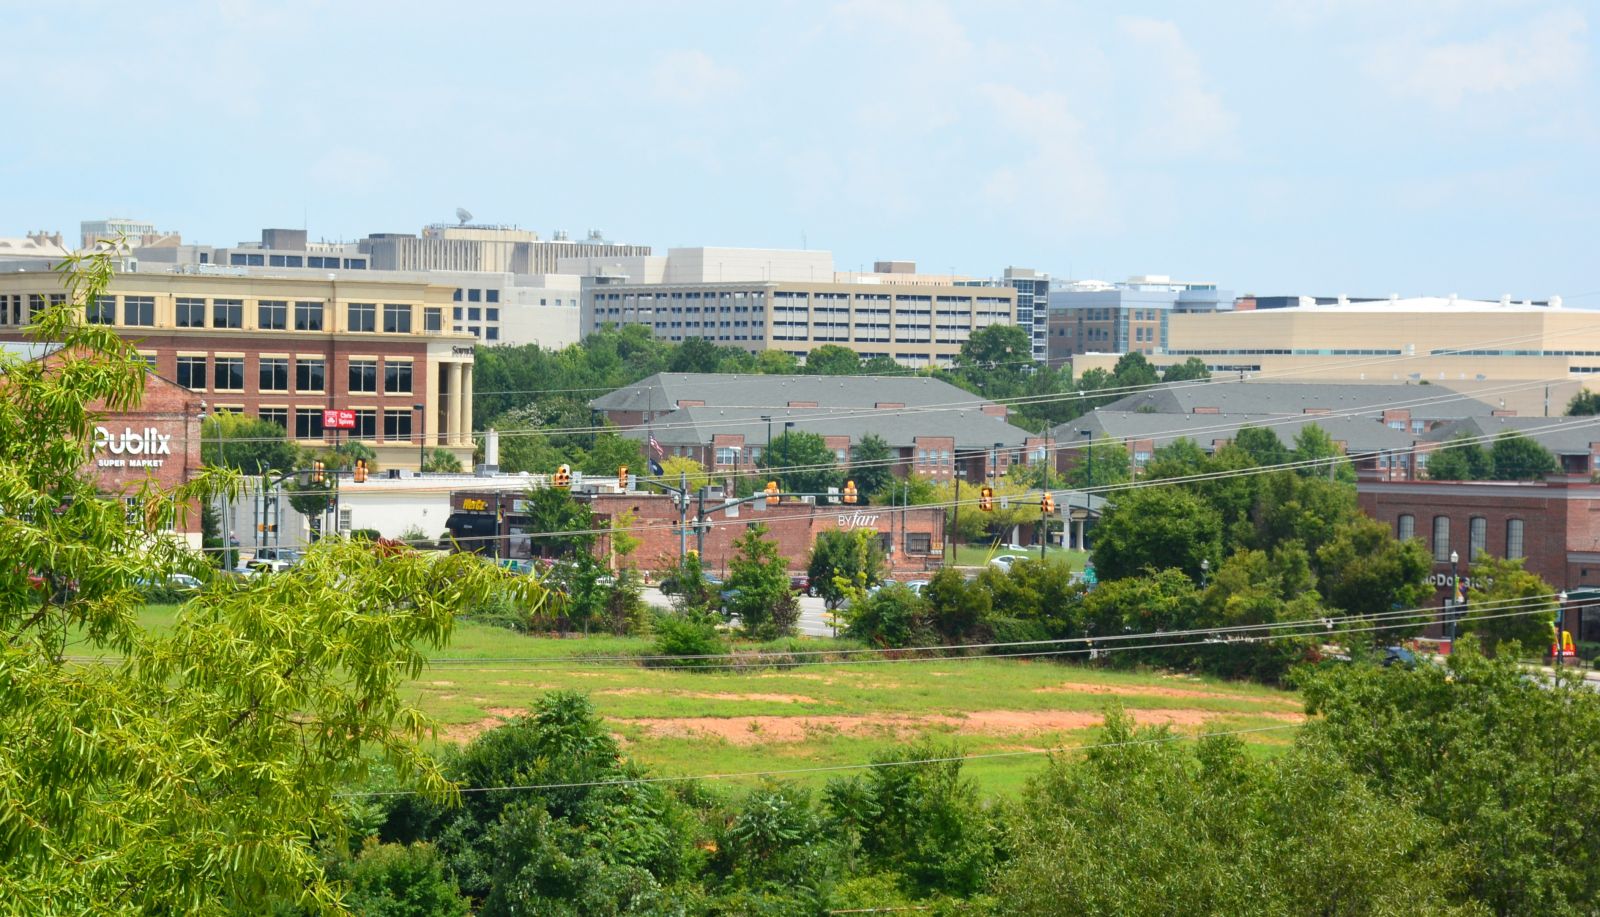 A deal to develop the former site of Kline Iron & Steel Co. at the corner of Huger and Gervais streets into a $92 million mixed-used development, including two hotels, has been approved by Richland County Council. (Photo/File)